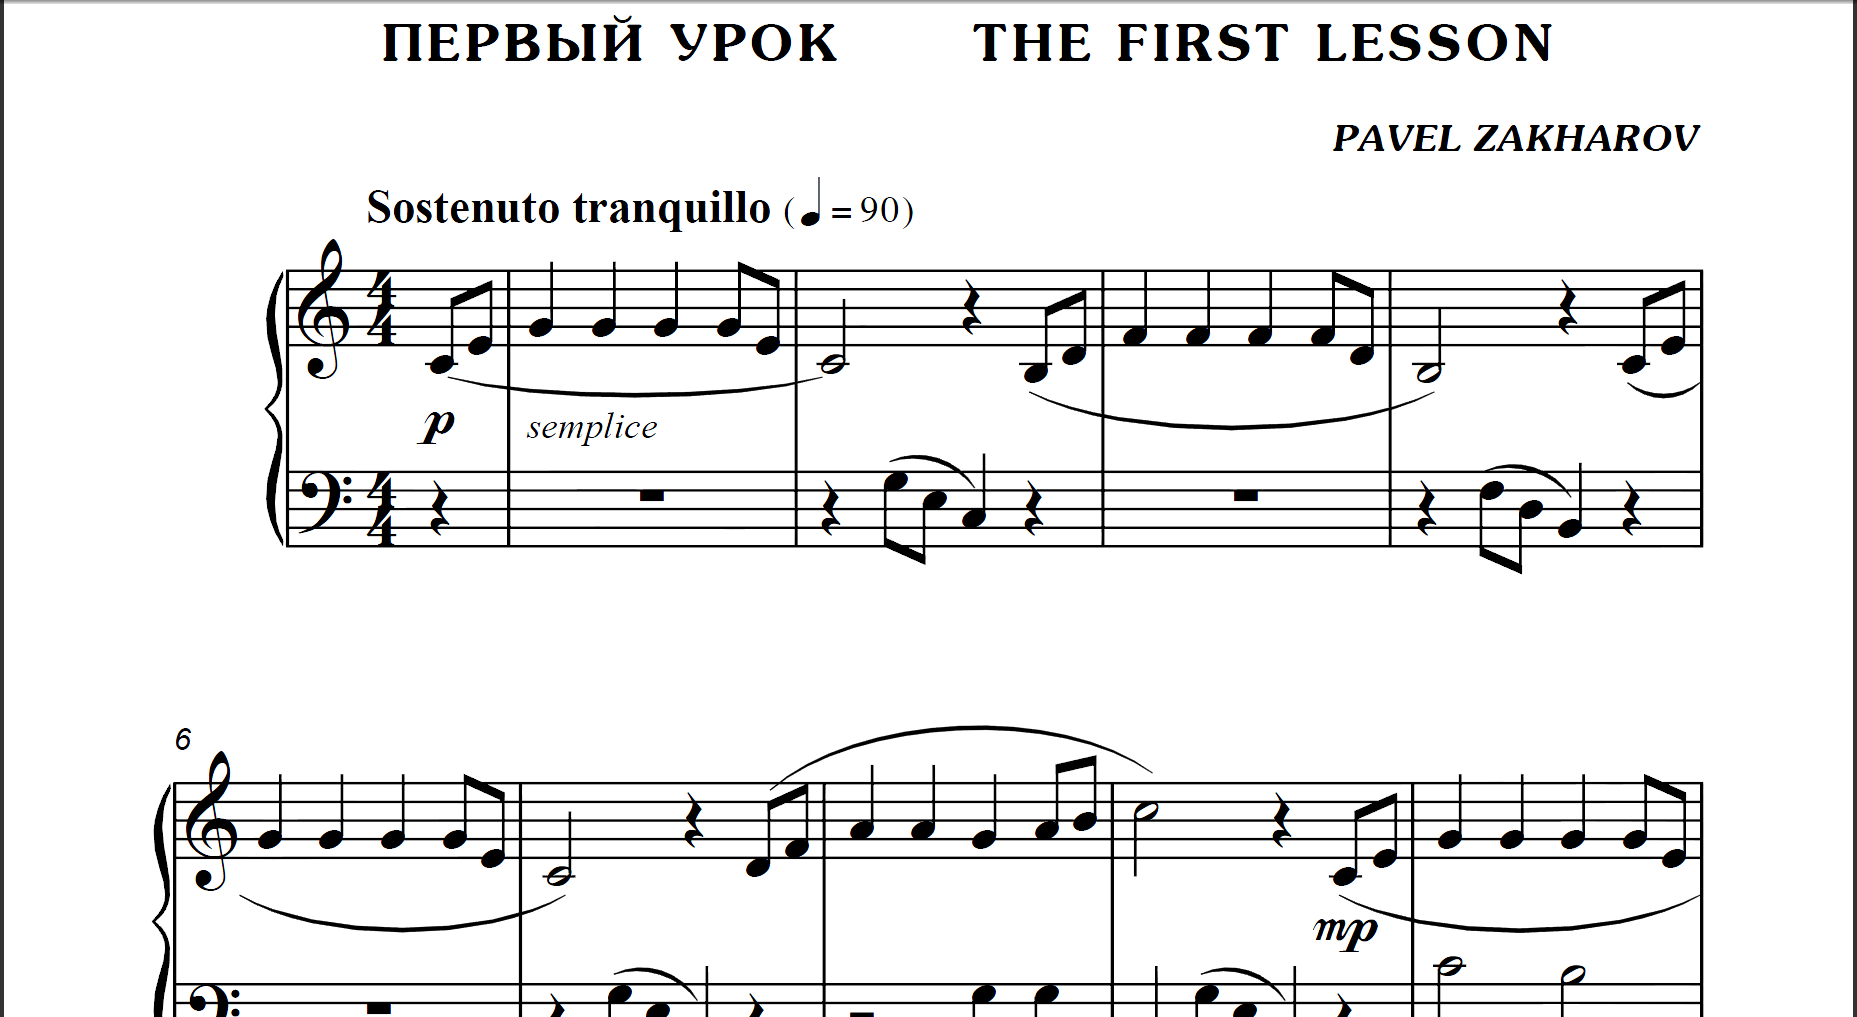 1s03 The First Lesson, PAVEL ZAKHAROV / piano